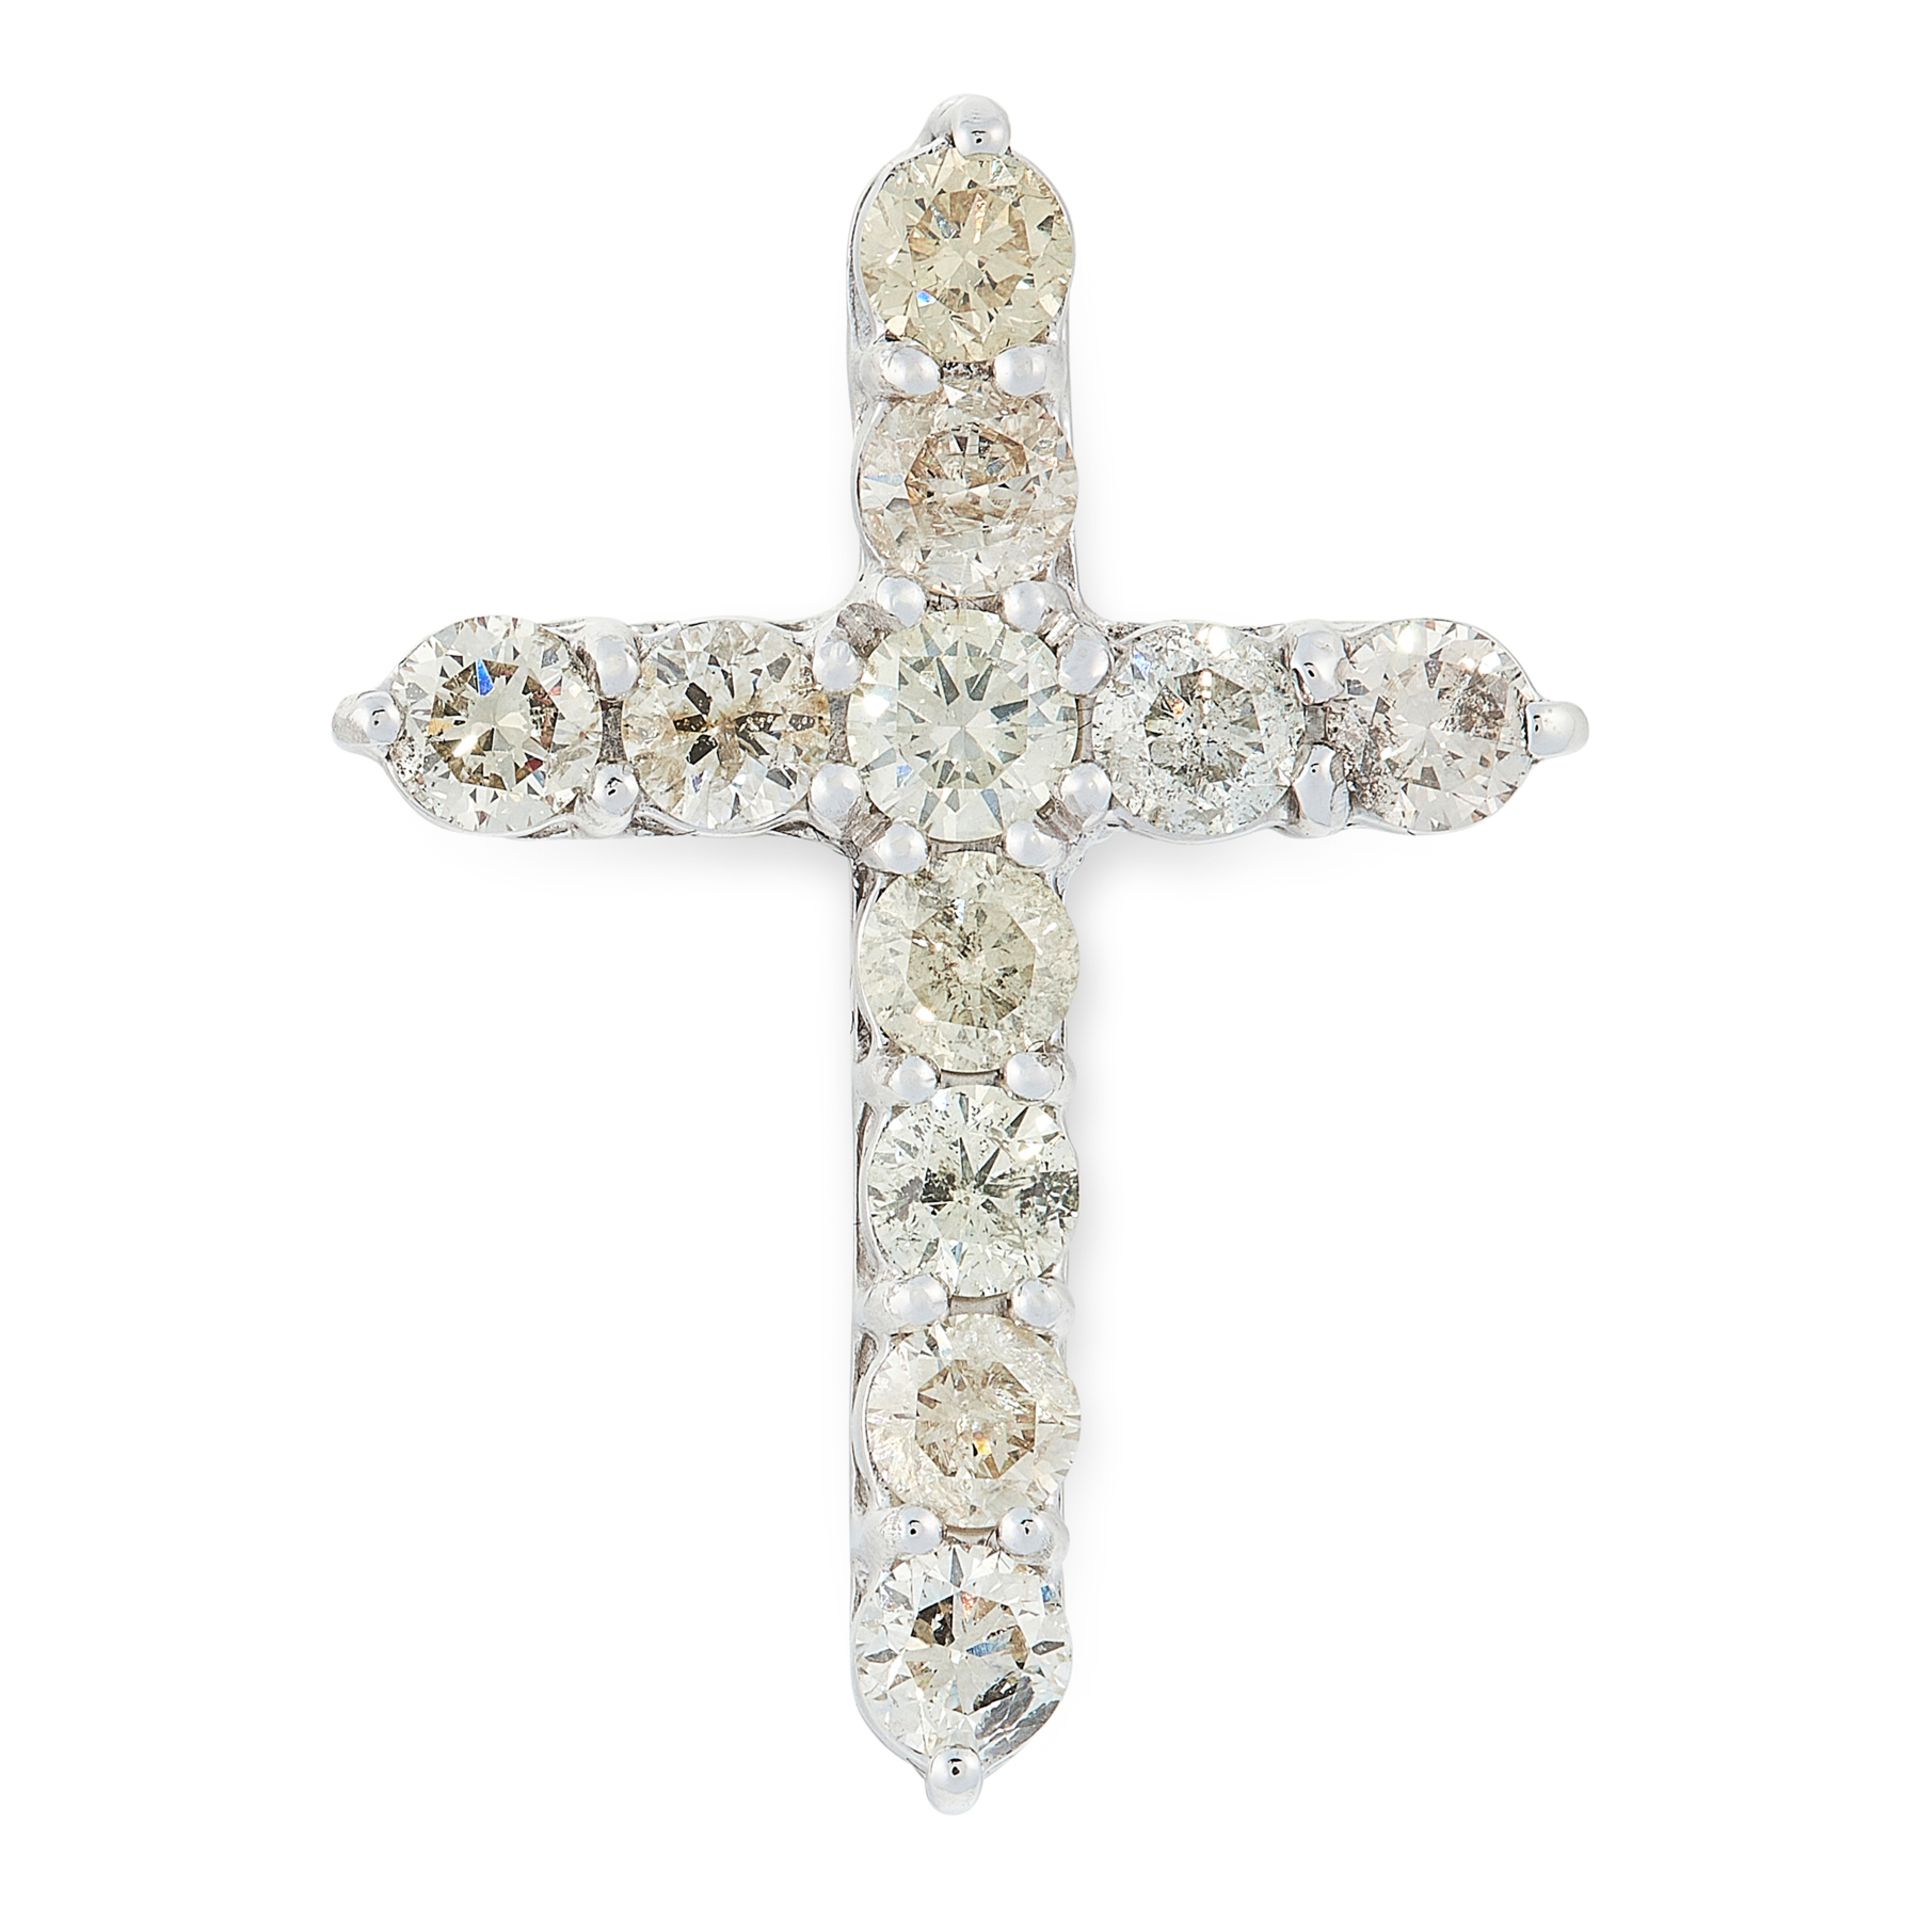 A DIAMOND CROSS PENDANT in 14ct white gold, designed as a cross, set with eleven round cut